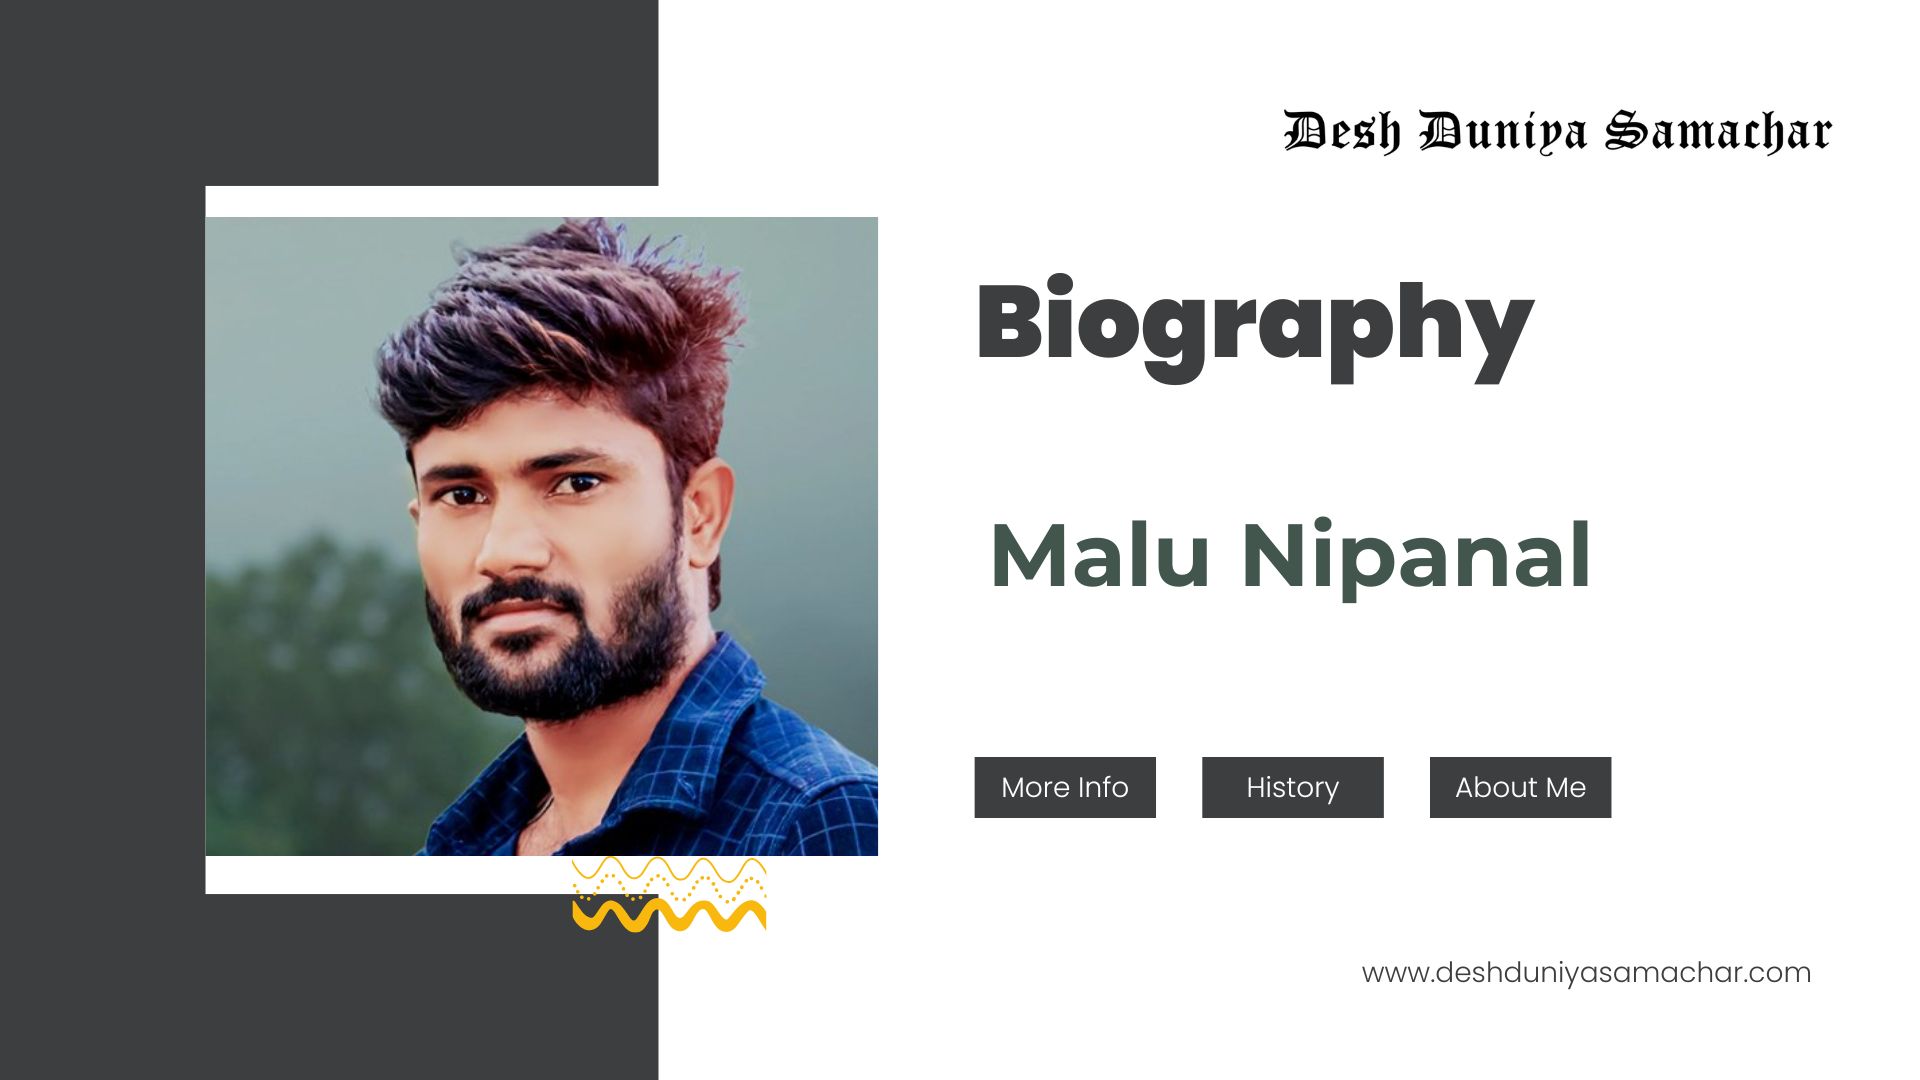 Malu Nipanal Biography – All you need to know about